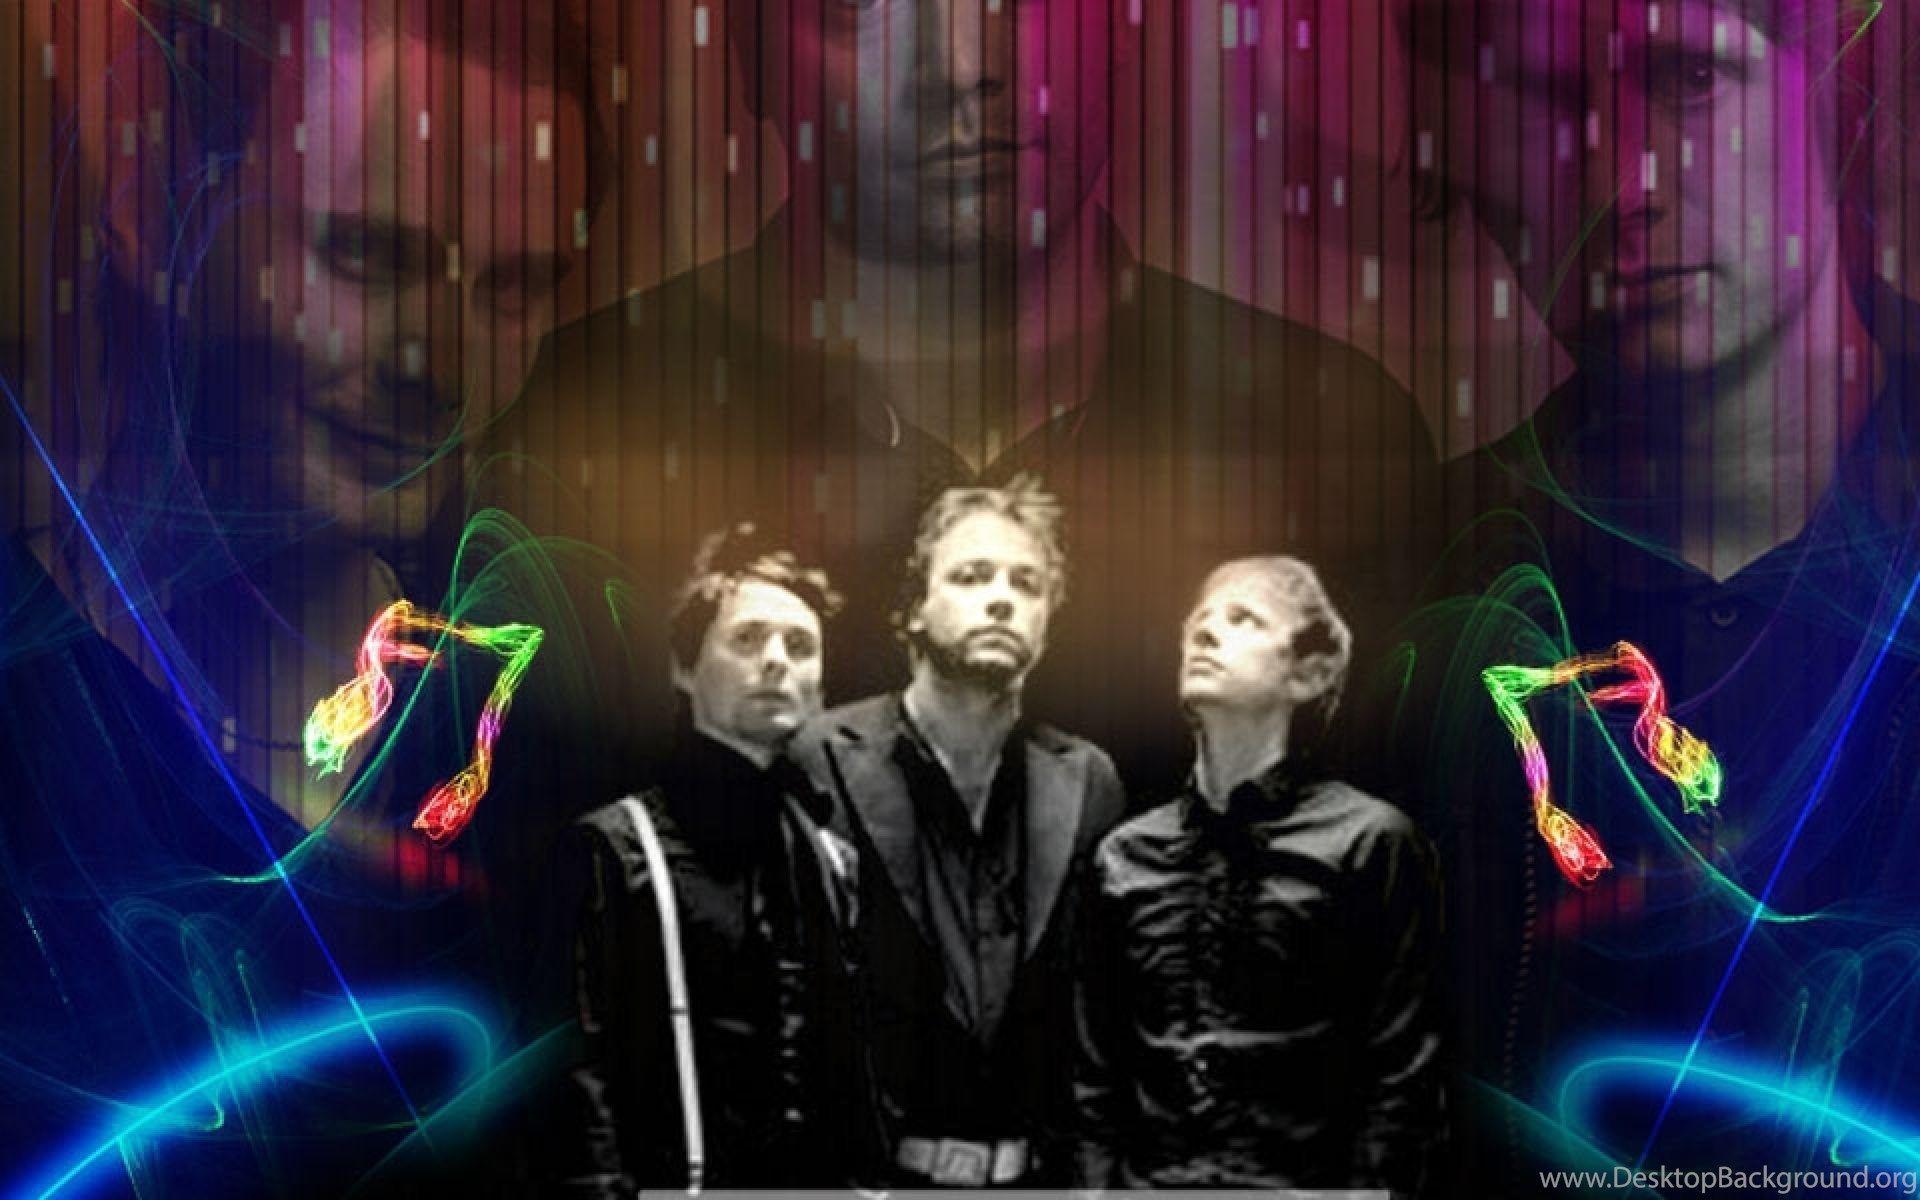 Download Wallpaper 3840x1200 Muse, Band, Members, Background